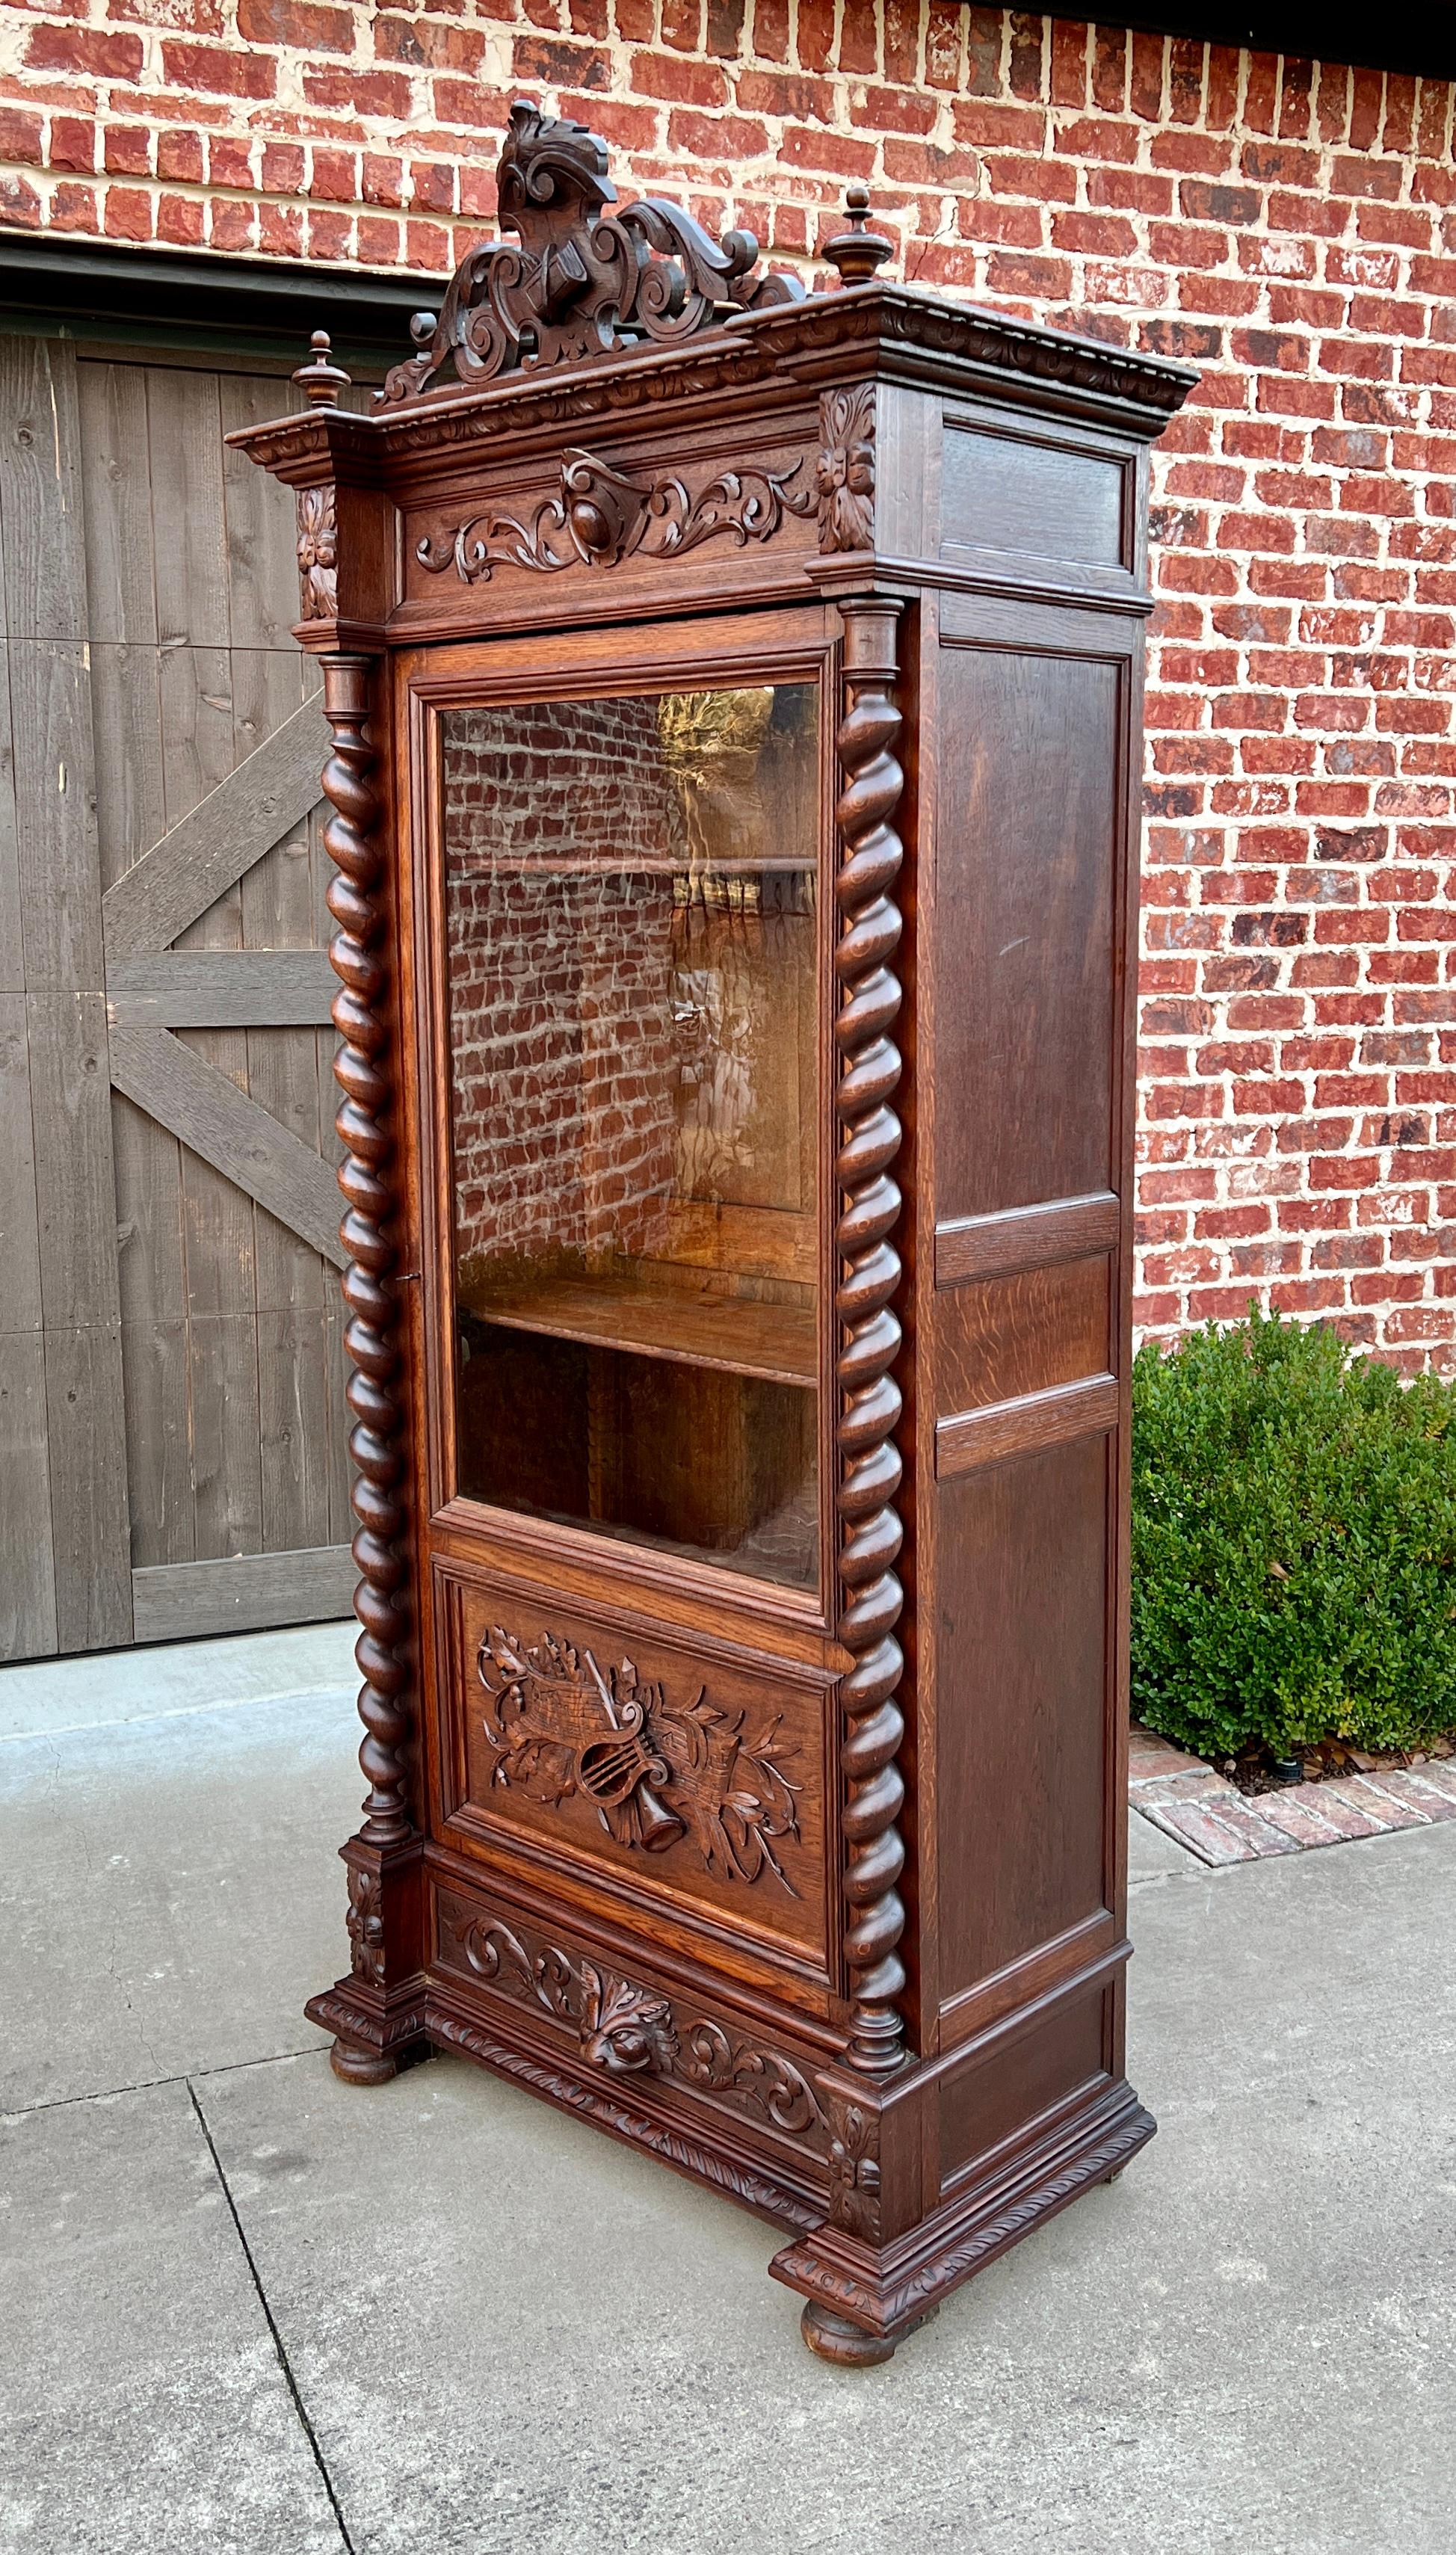 Renaissance Revival Antique French Bookcase Cabinet Display Barley Twist Scholars Carved Oak 19th C